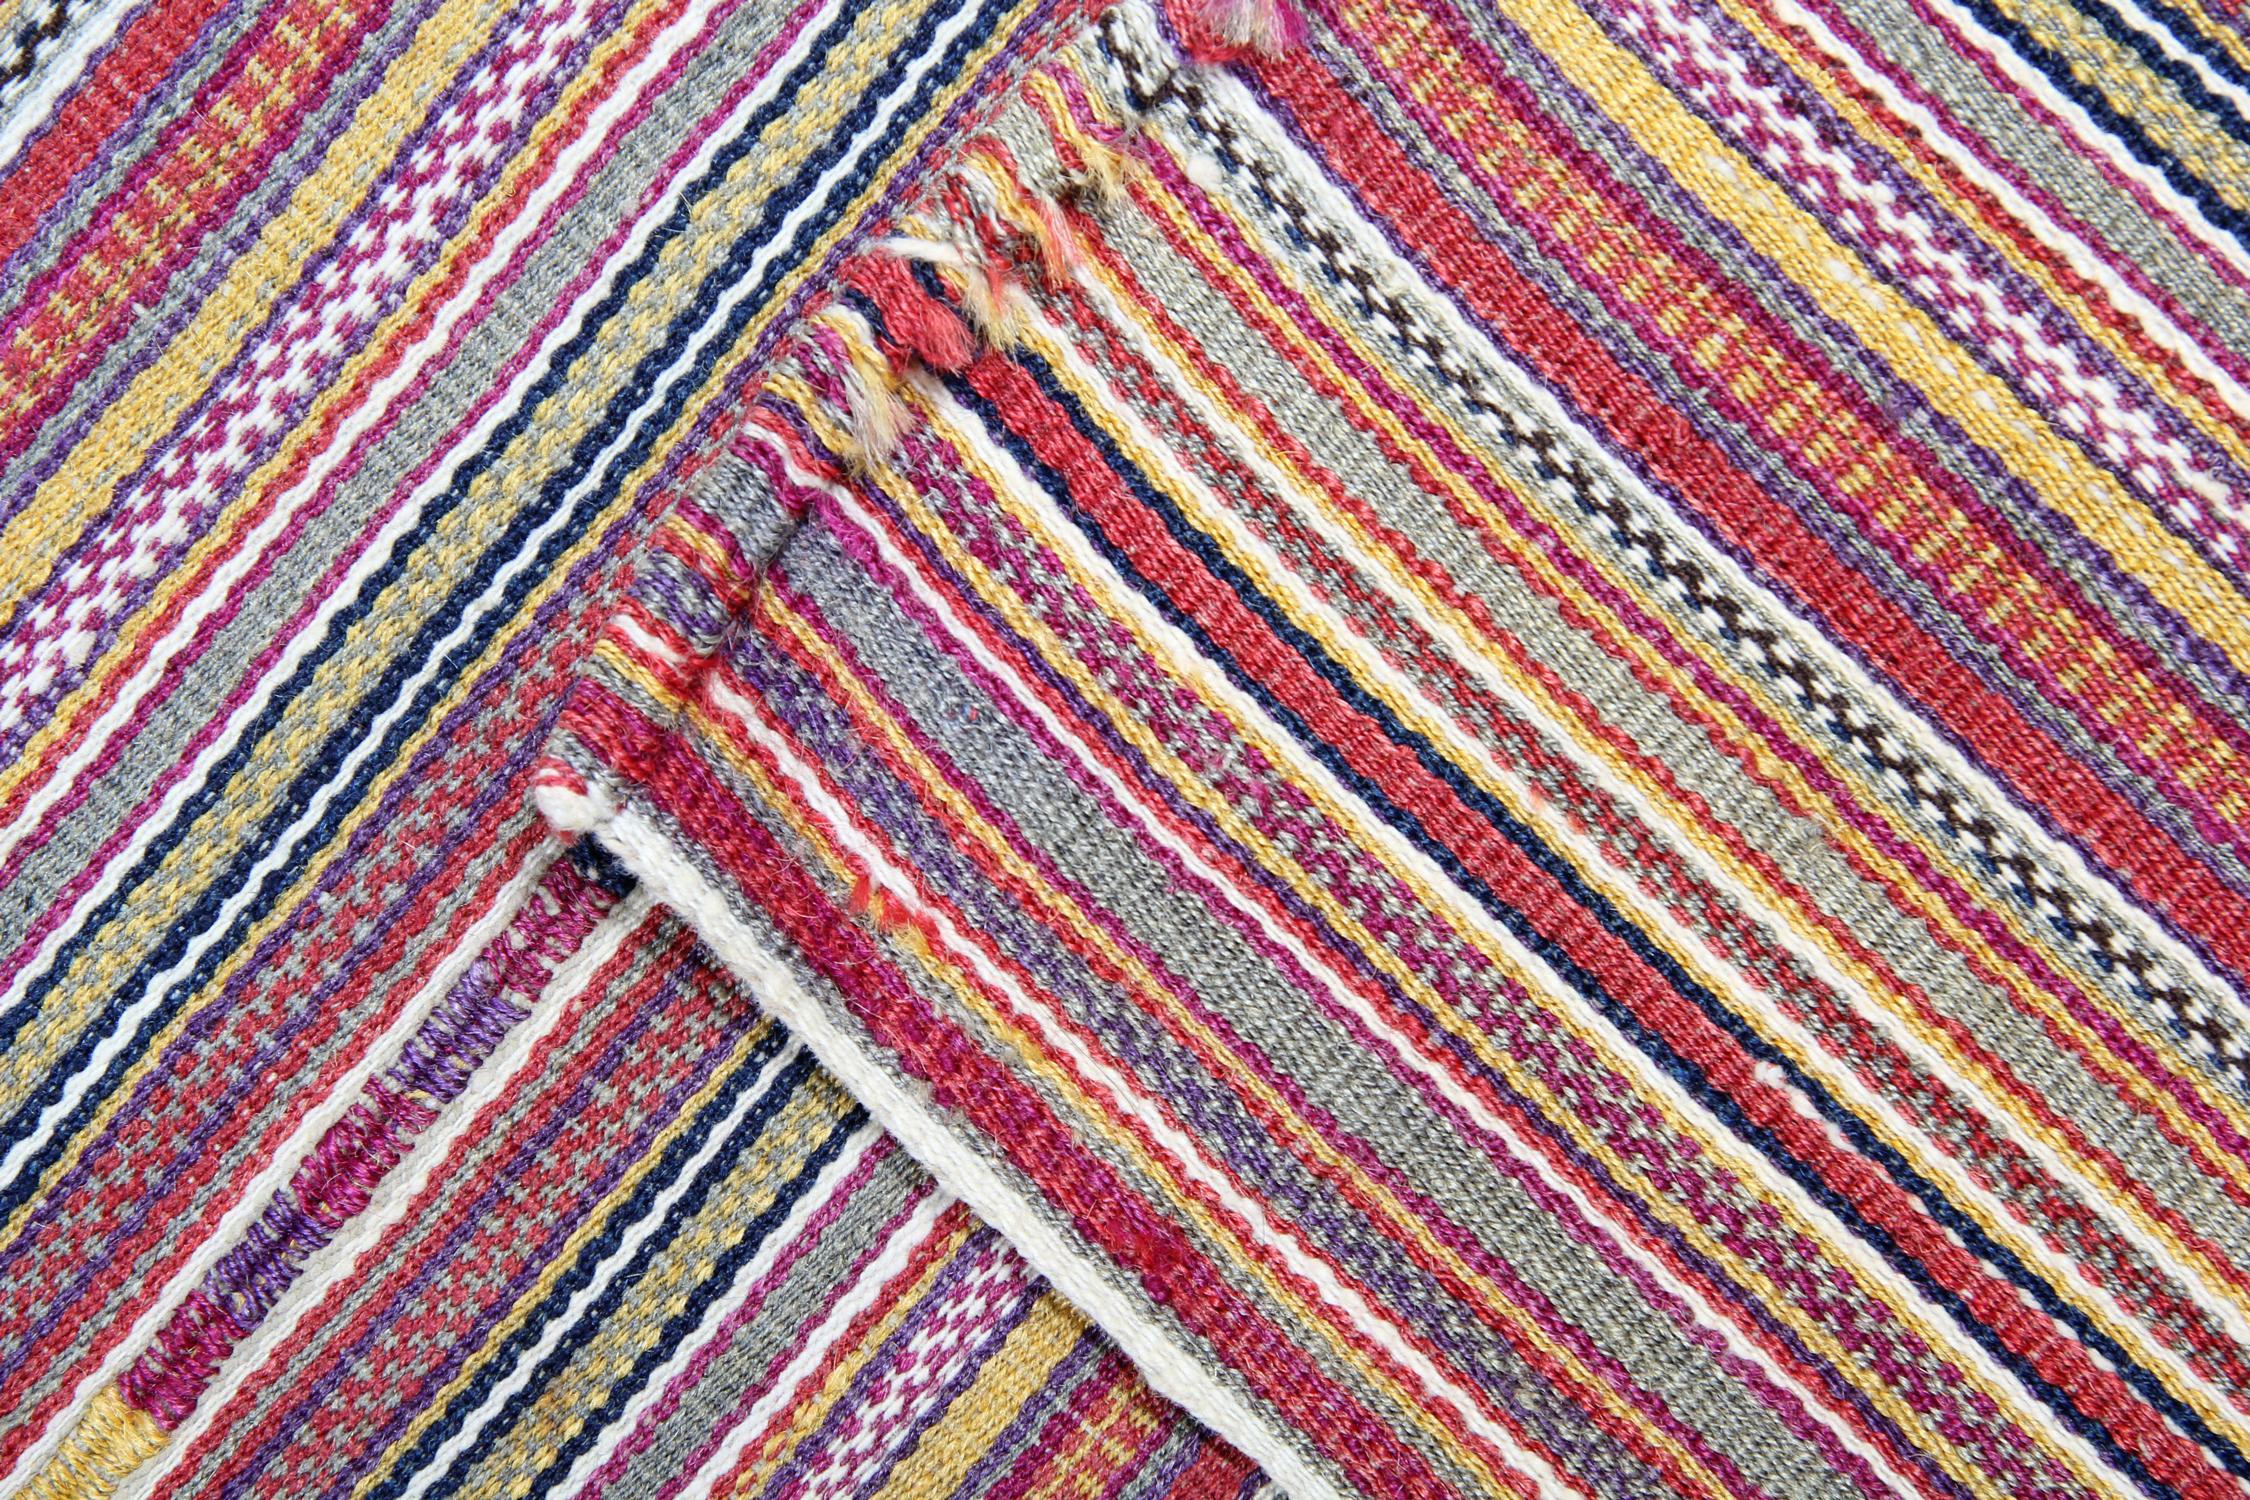 Hand-Woven Handmade Kilim Rugs, Antique Wool Jajim, Striped Red Cream Wool Textile For Sale